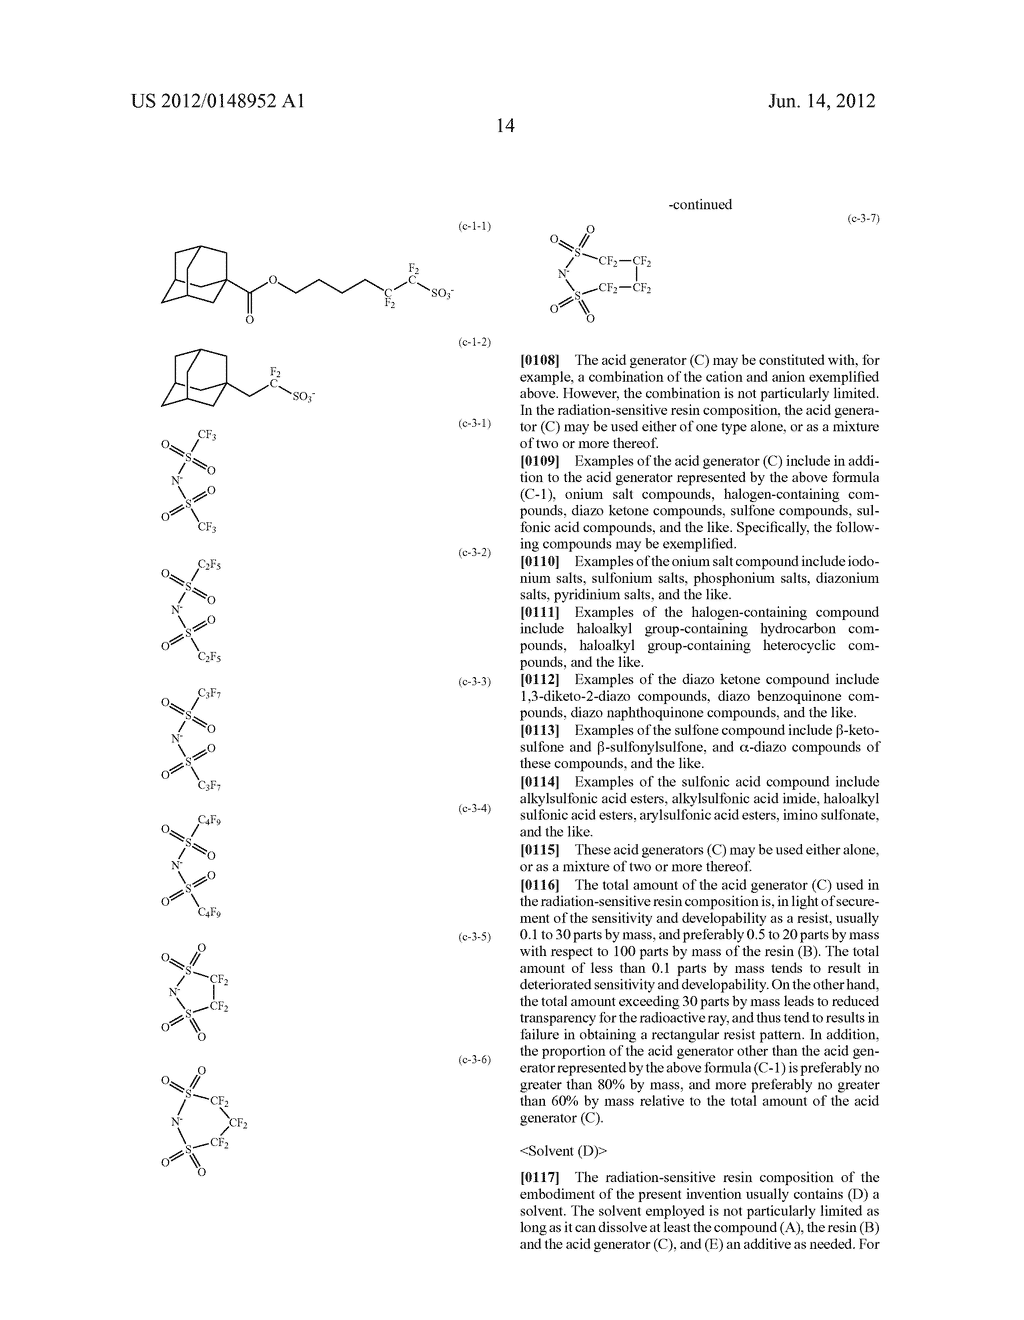 RADIATION-SENSITIVE RESIN COMPOSITION AND COMPOUND - diagram, schematic, and image 15